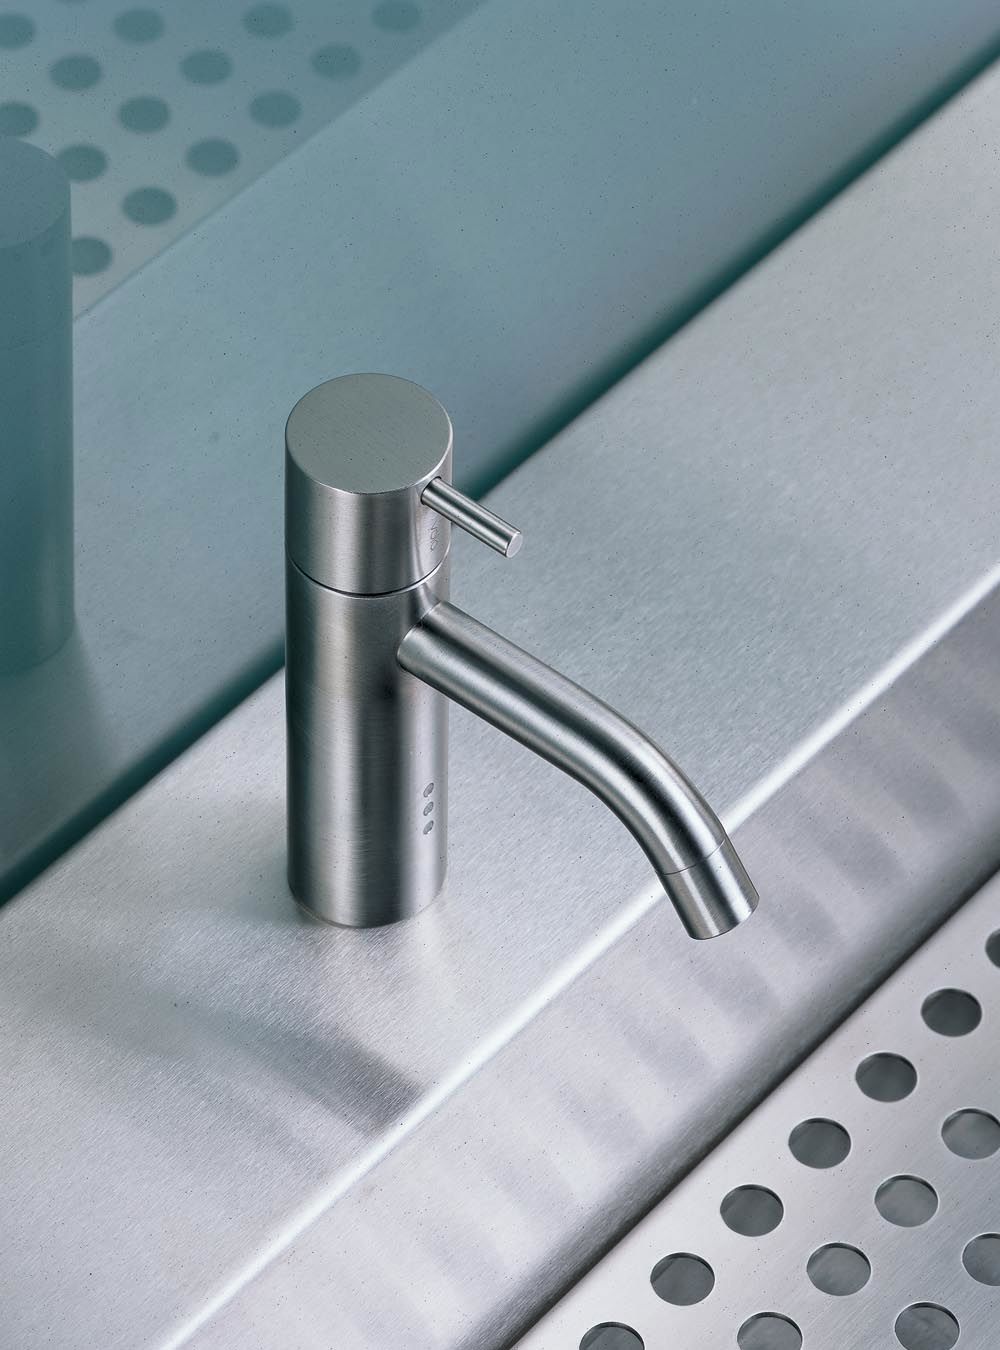 HV1E2: Basin mixer with on-off sensor for ‘hands free’ operation.The temperature control handle is availabl